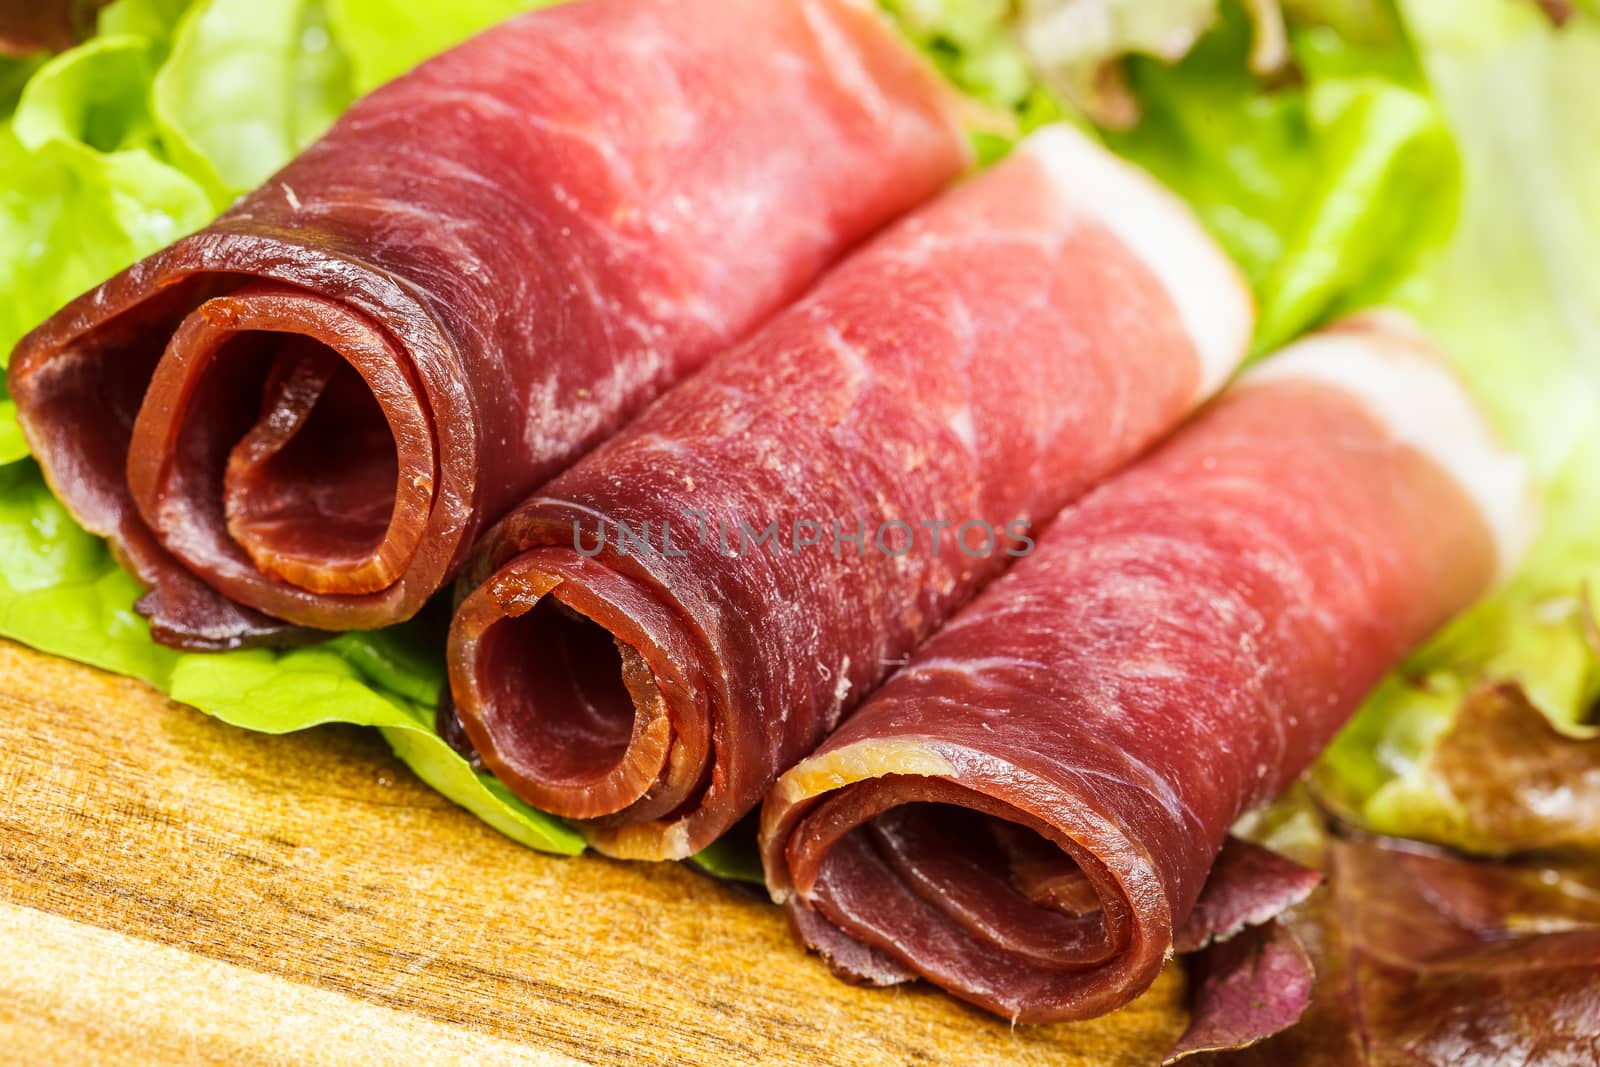 Slices of prosciutto rolled up and arranged on a lettuce leaf.